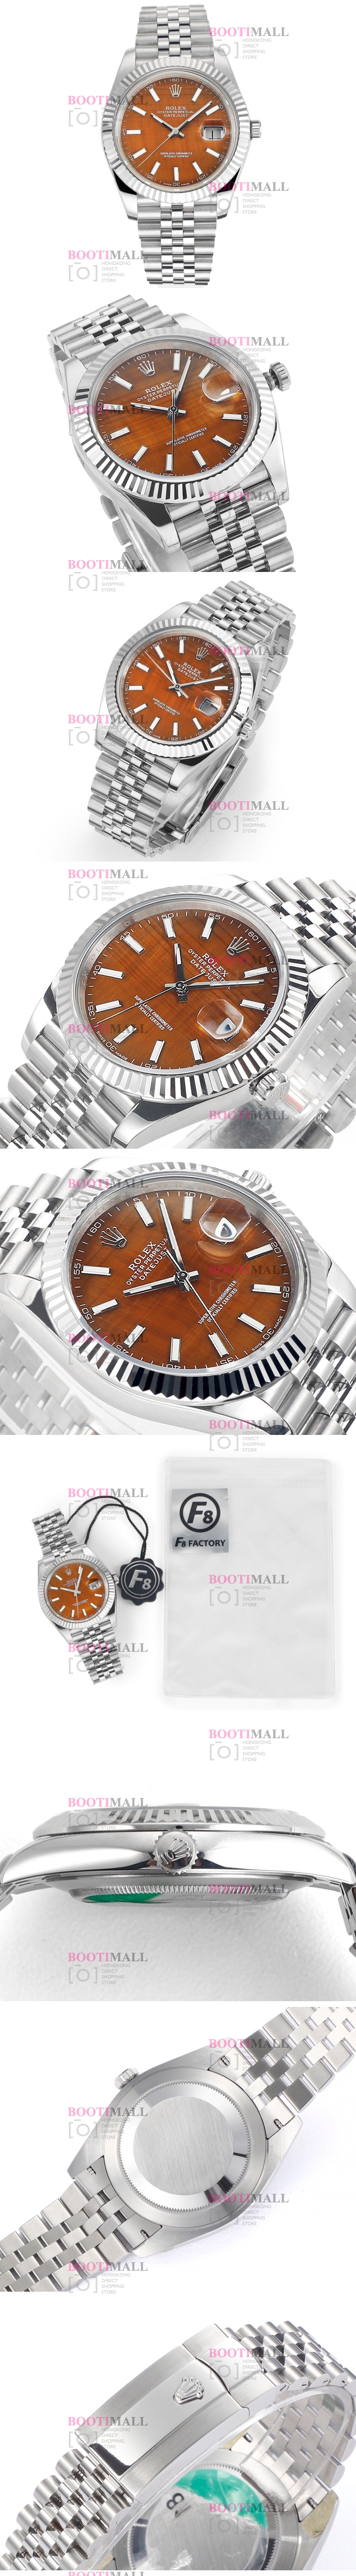 Datejust  Oyster Perpetual